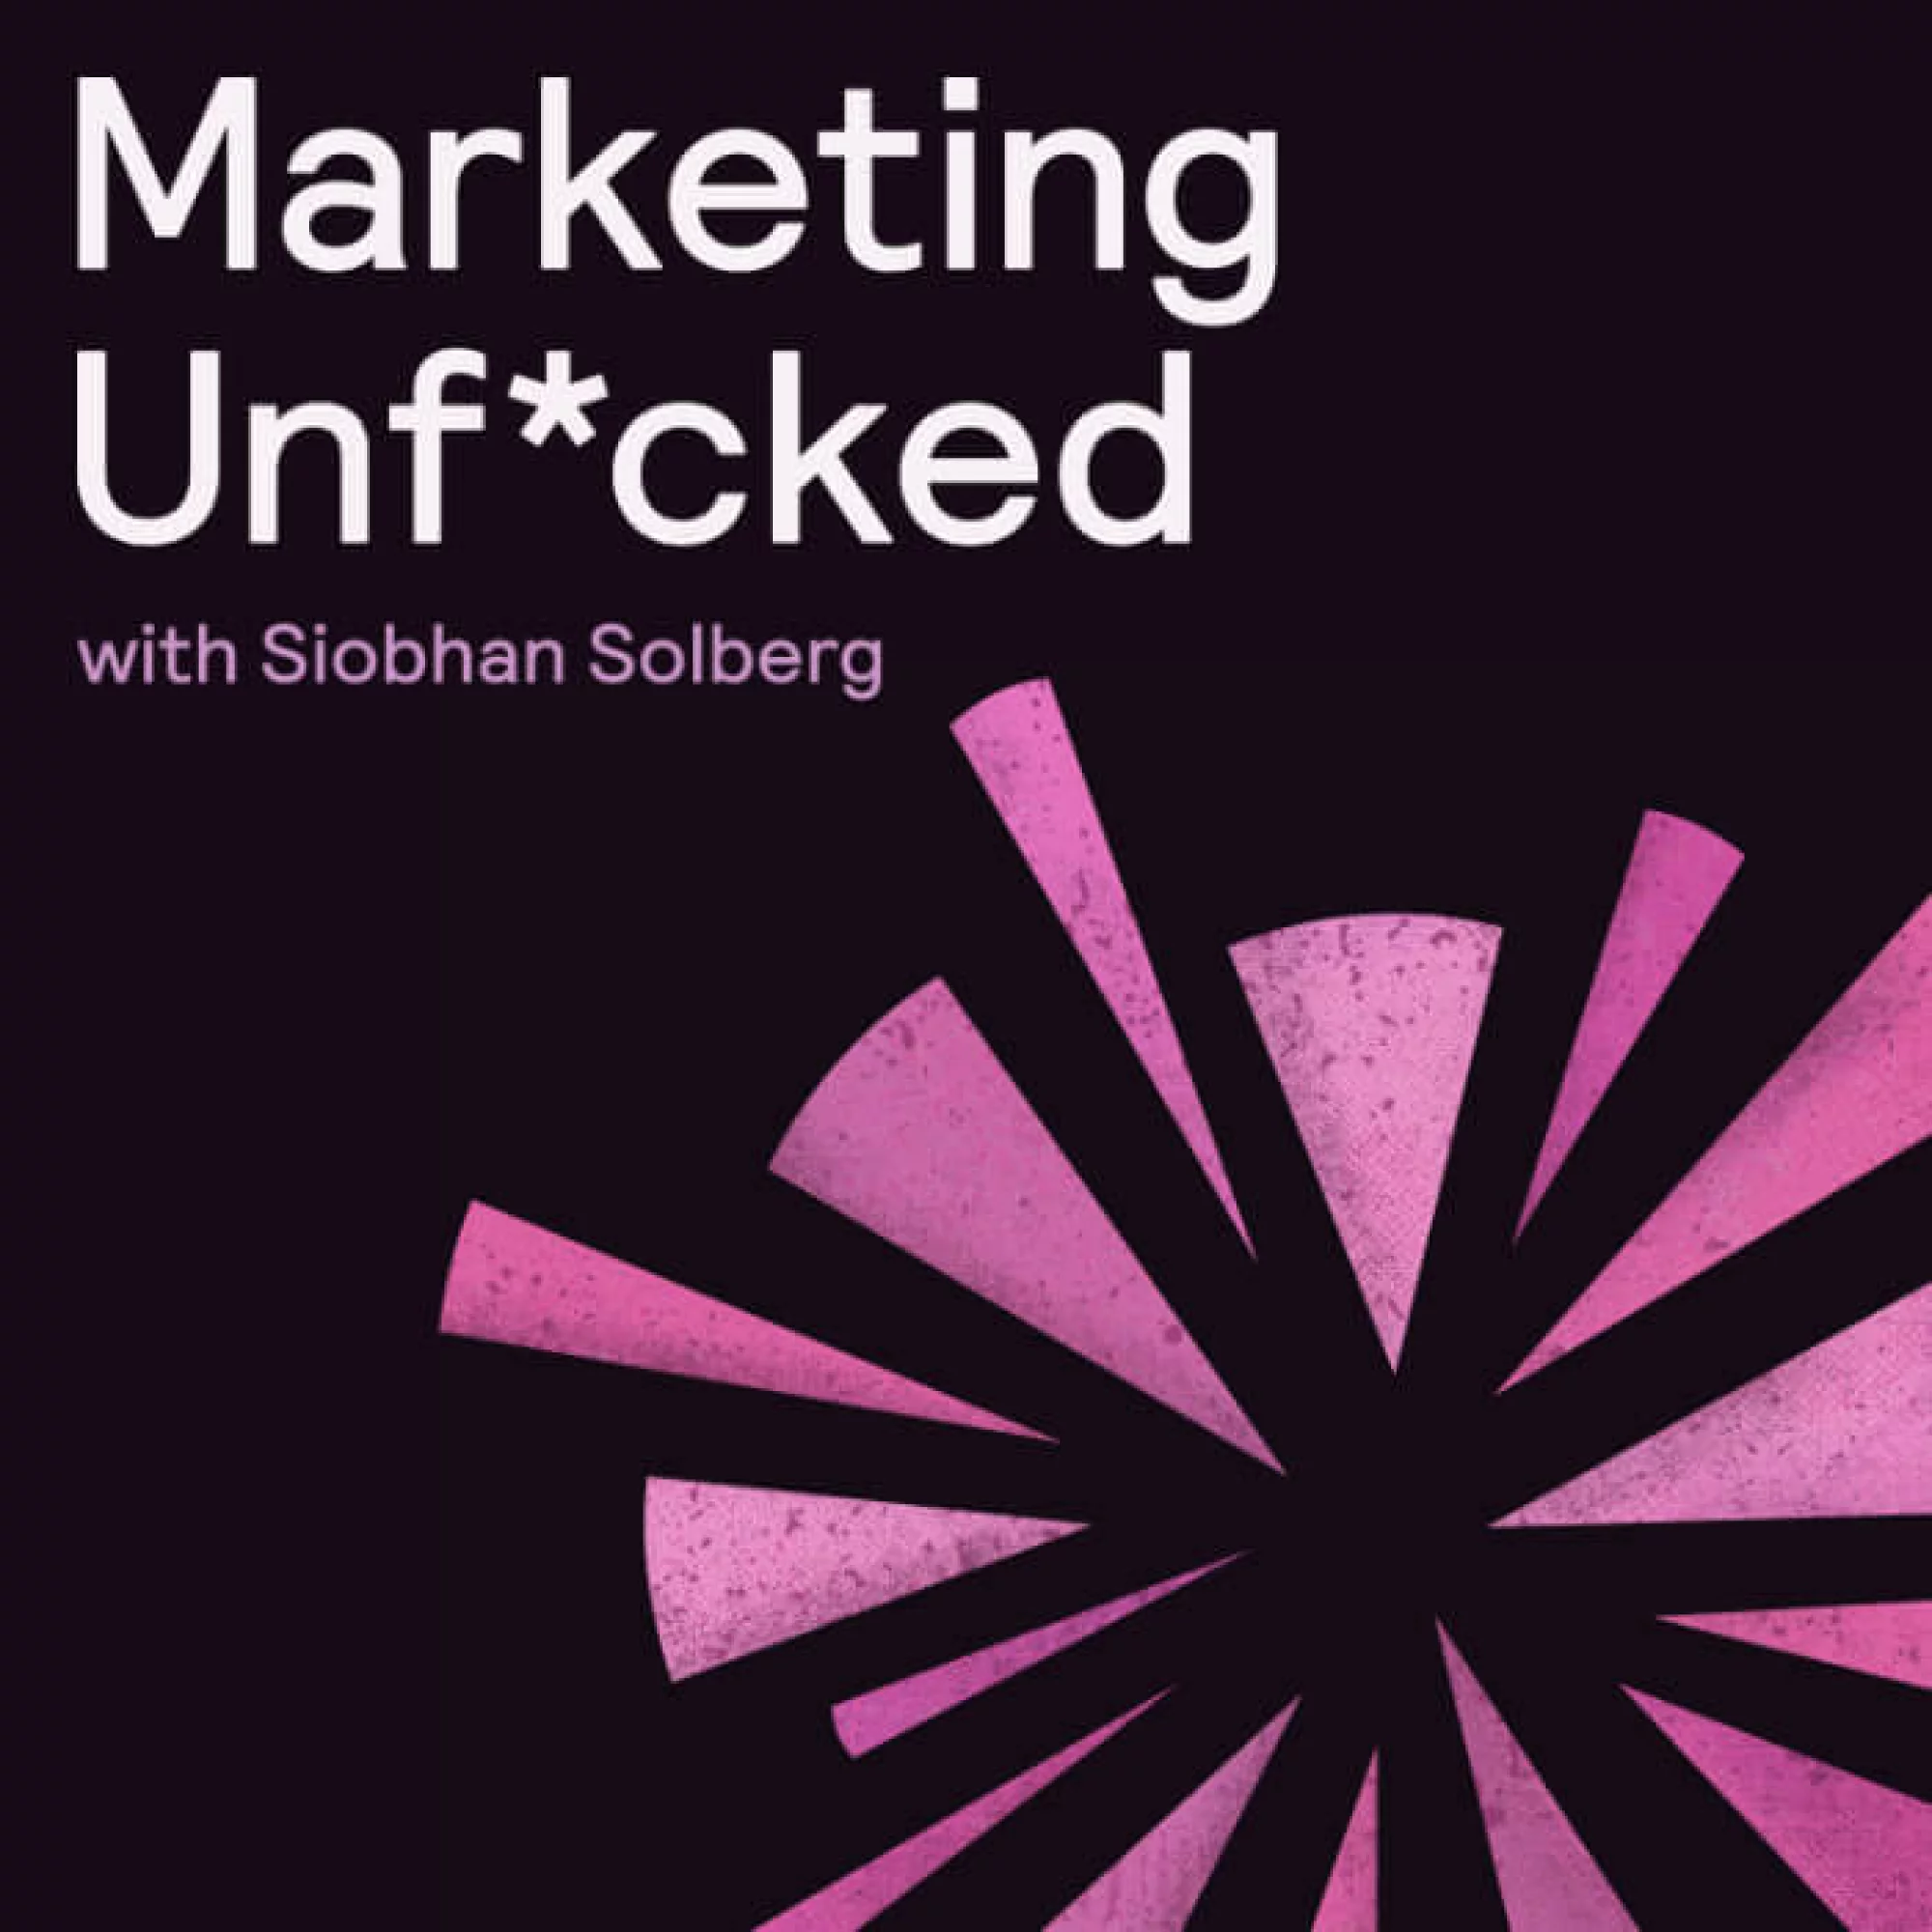 Cover artwork for the Marketing Unf*cked podcast.